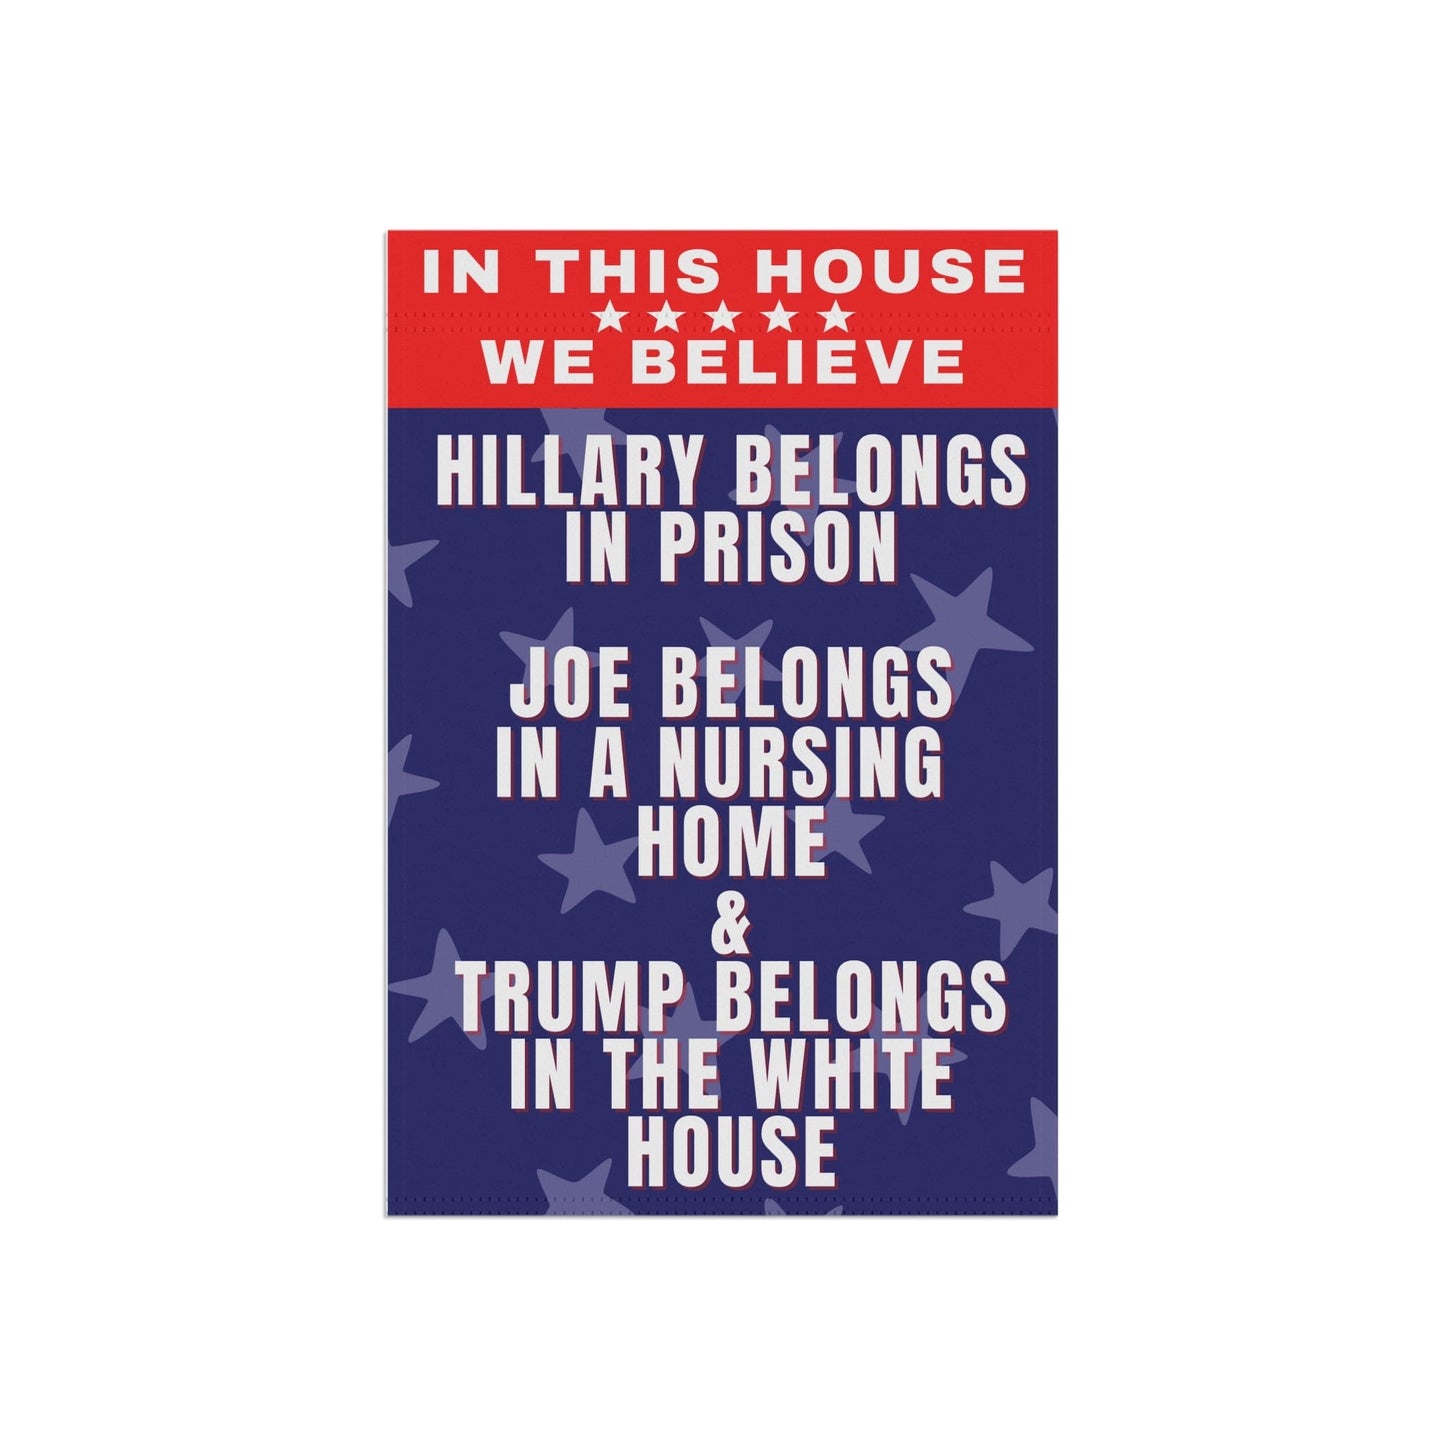 In this House We Believe Hillary belongs in Prison and Trump belongs in the White House